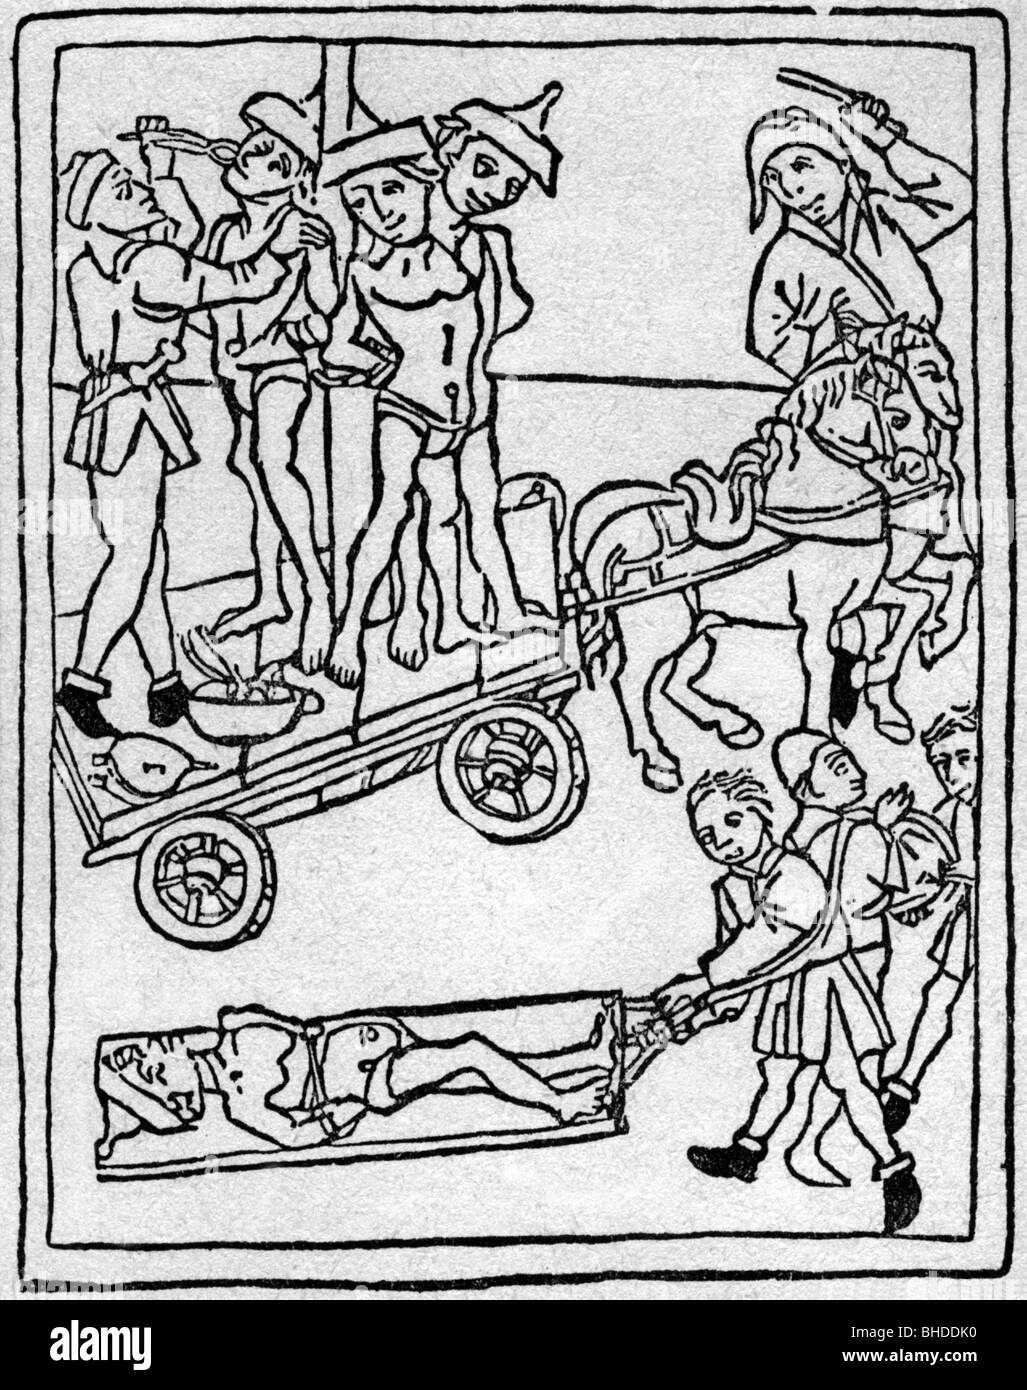 Judaism / Jewry and persecution of Jews, torture of Jews, carried to place of execution, woodcut, 1475, Stock Photo